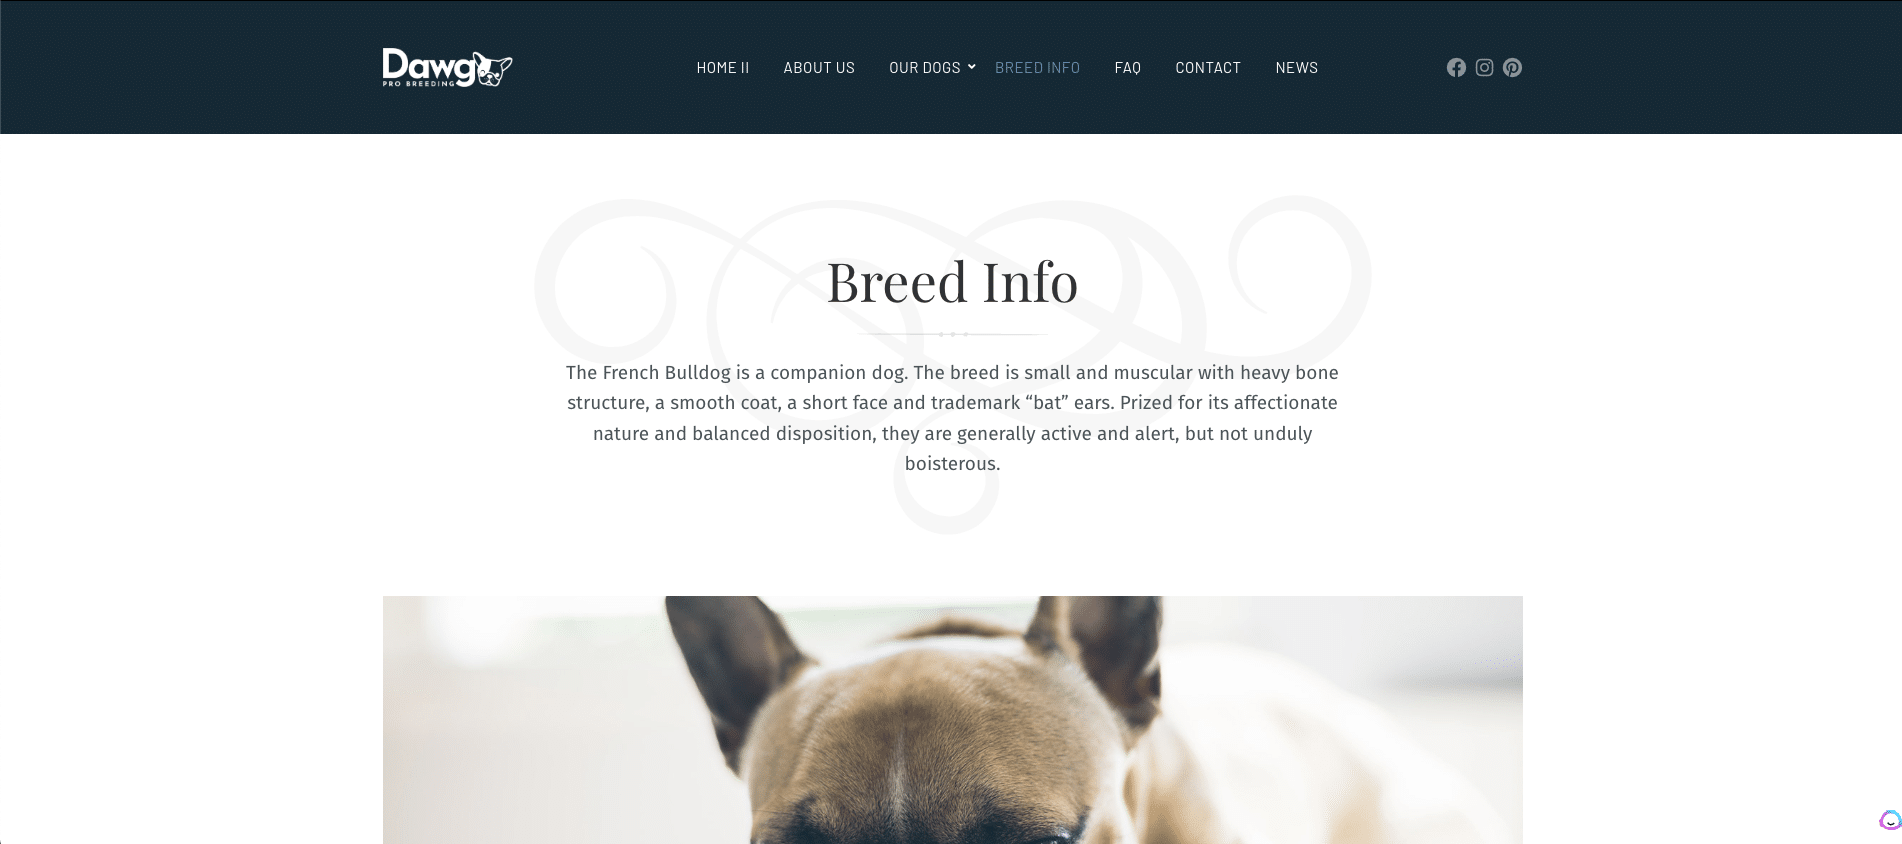 How to Create A Dog Breeding Website (Step-By-Step Guide) 10